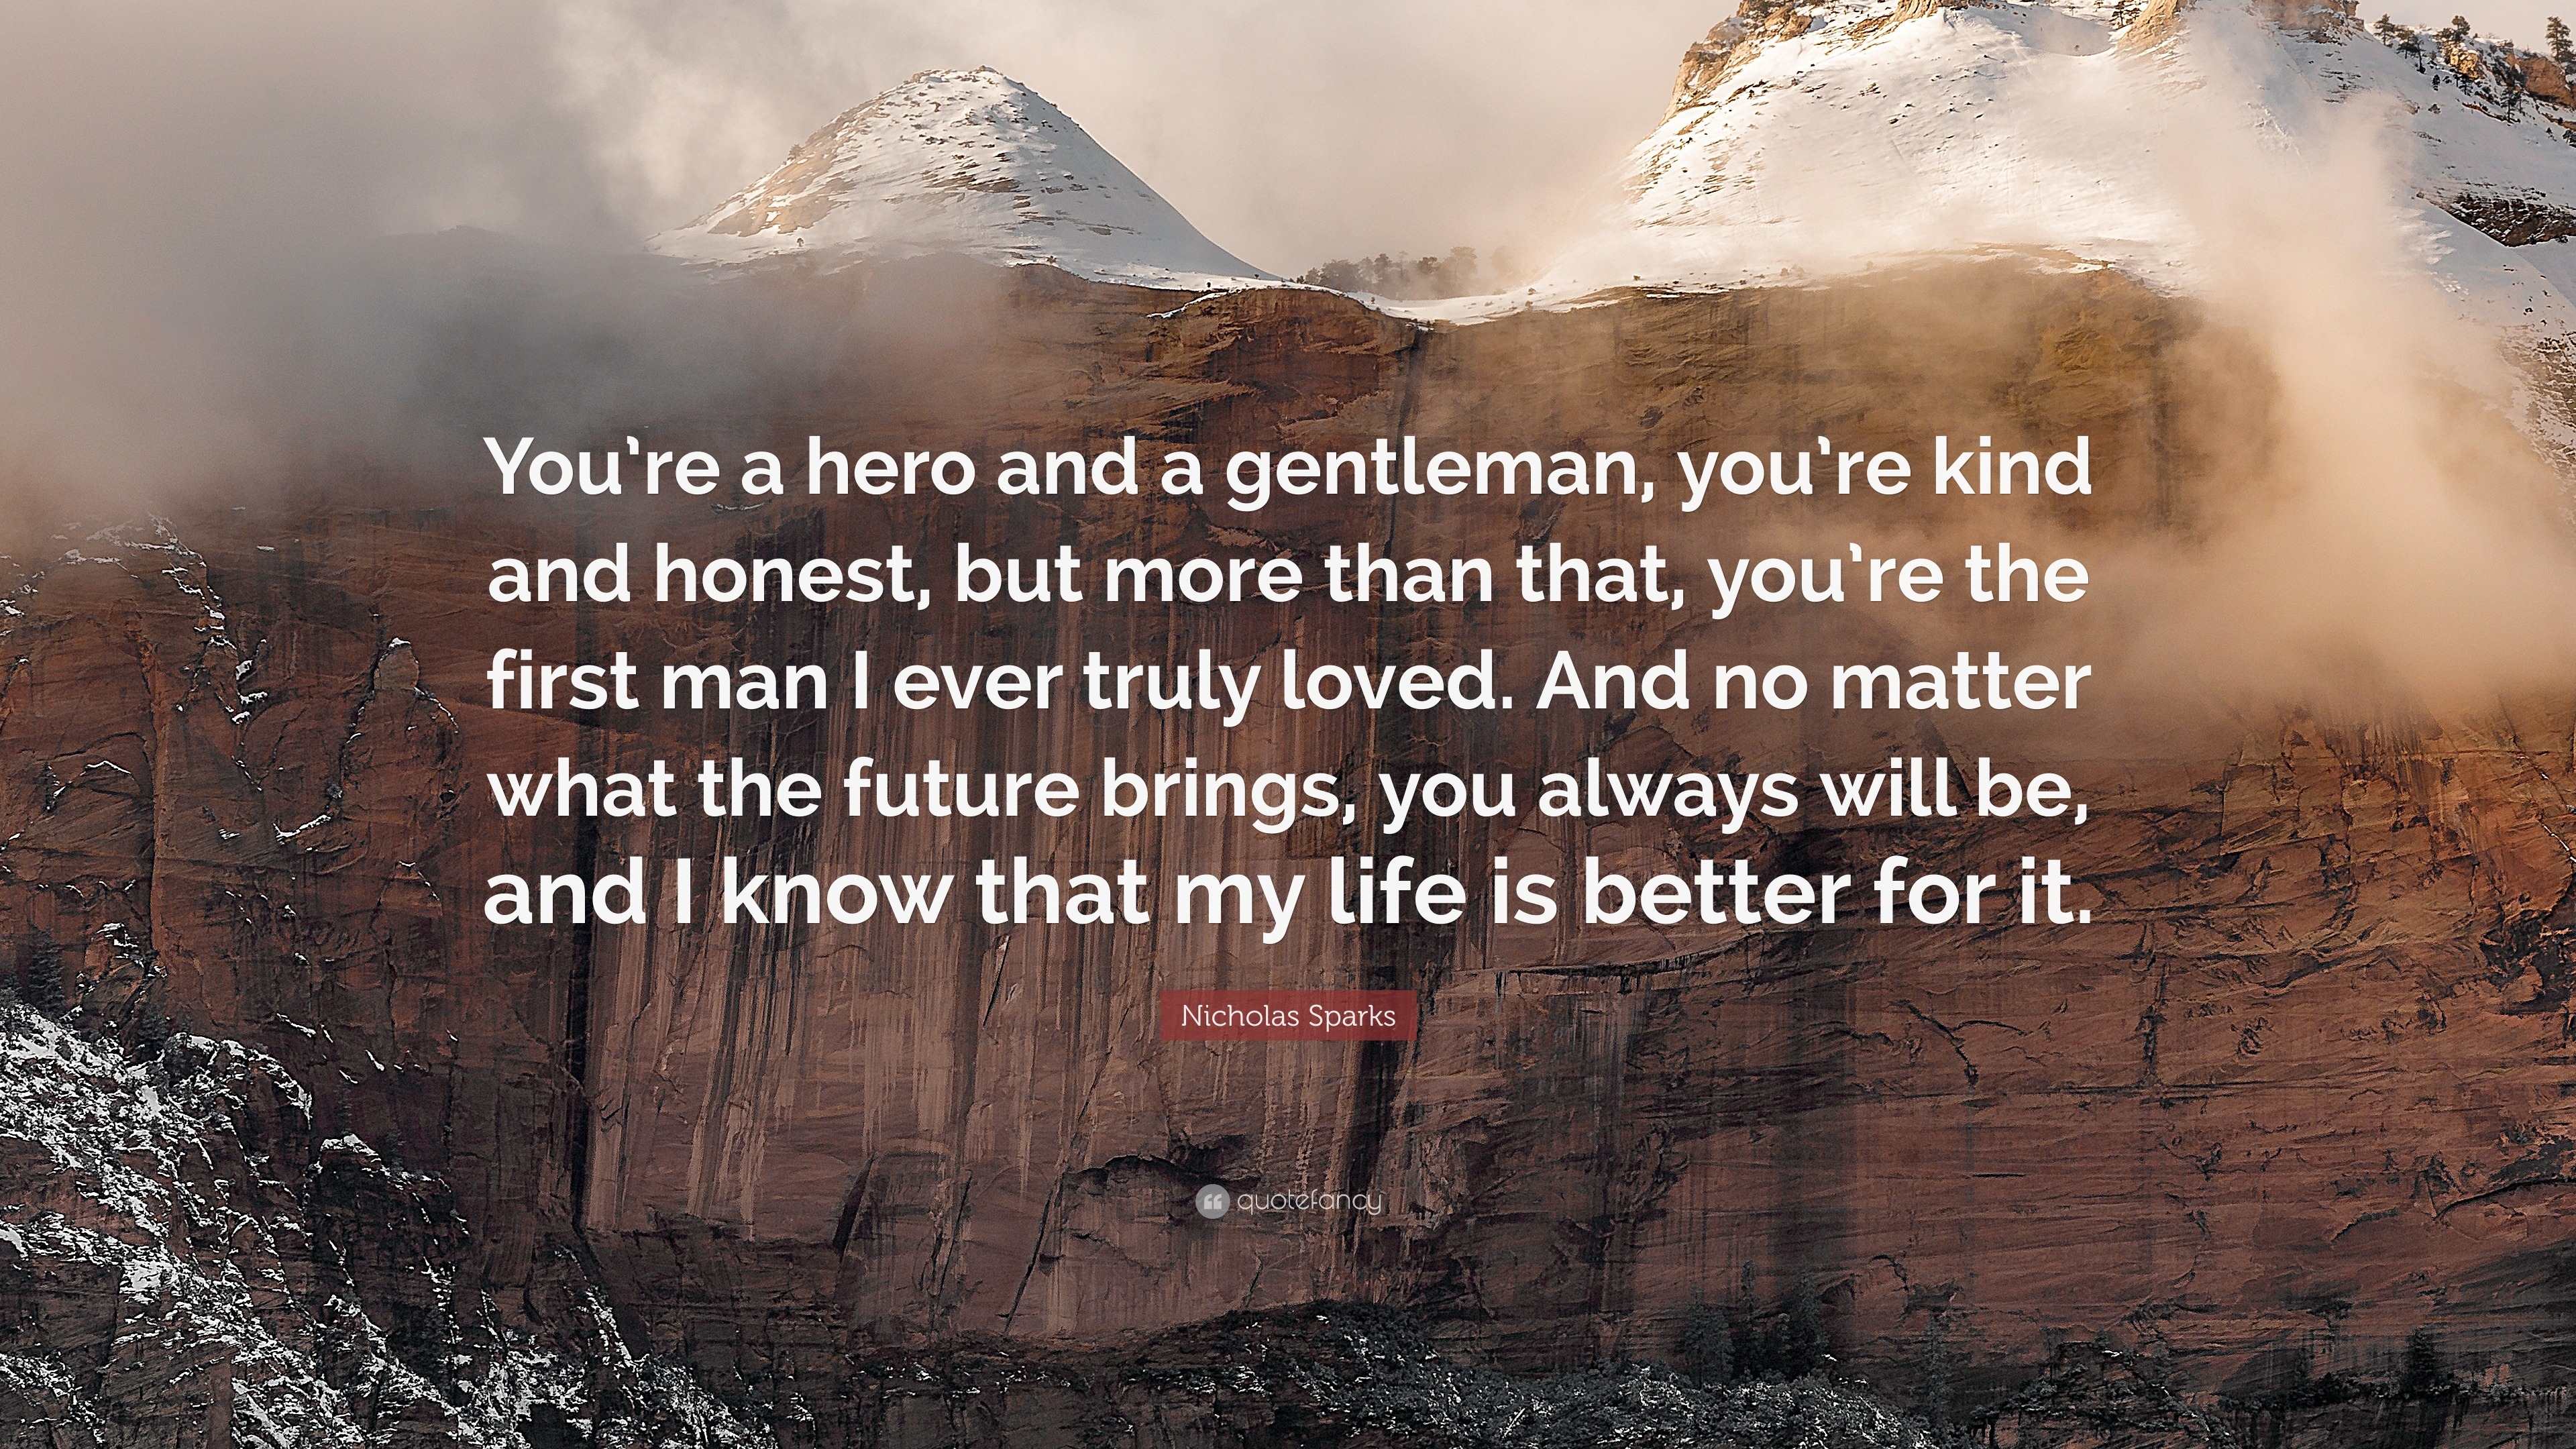 Nicholas Sparks Quote “You re a hero and a gentleman you